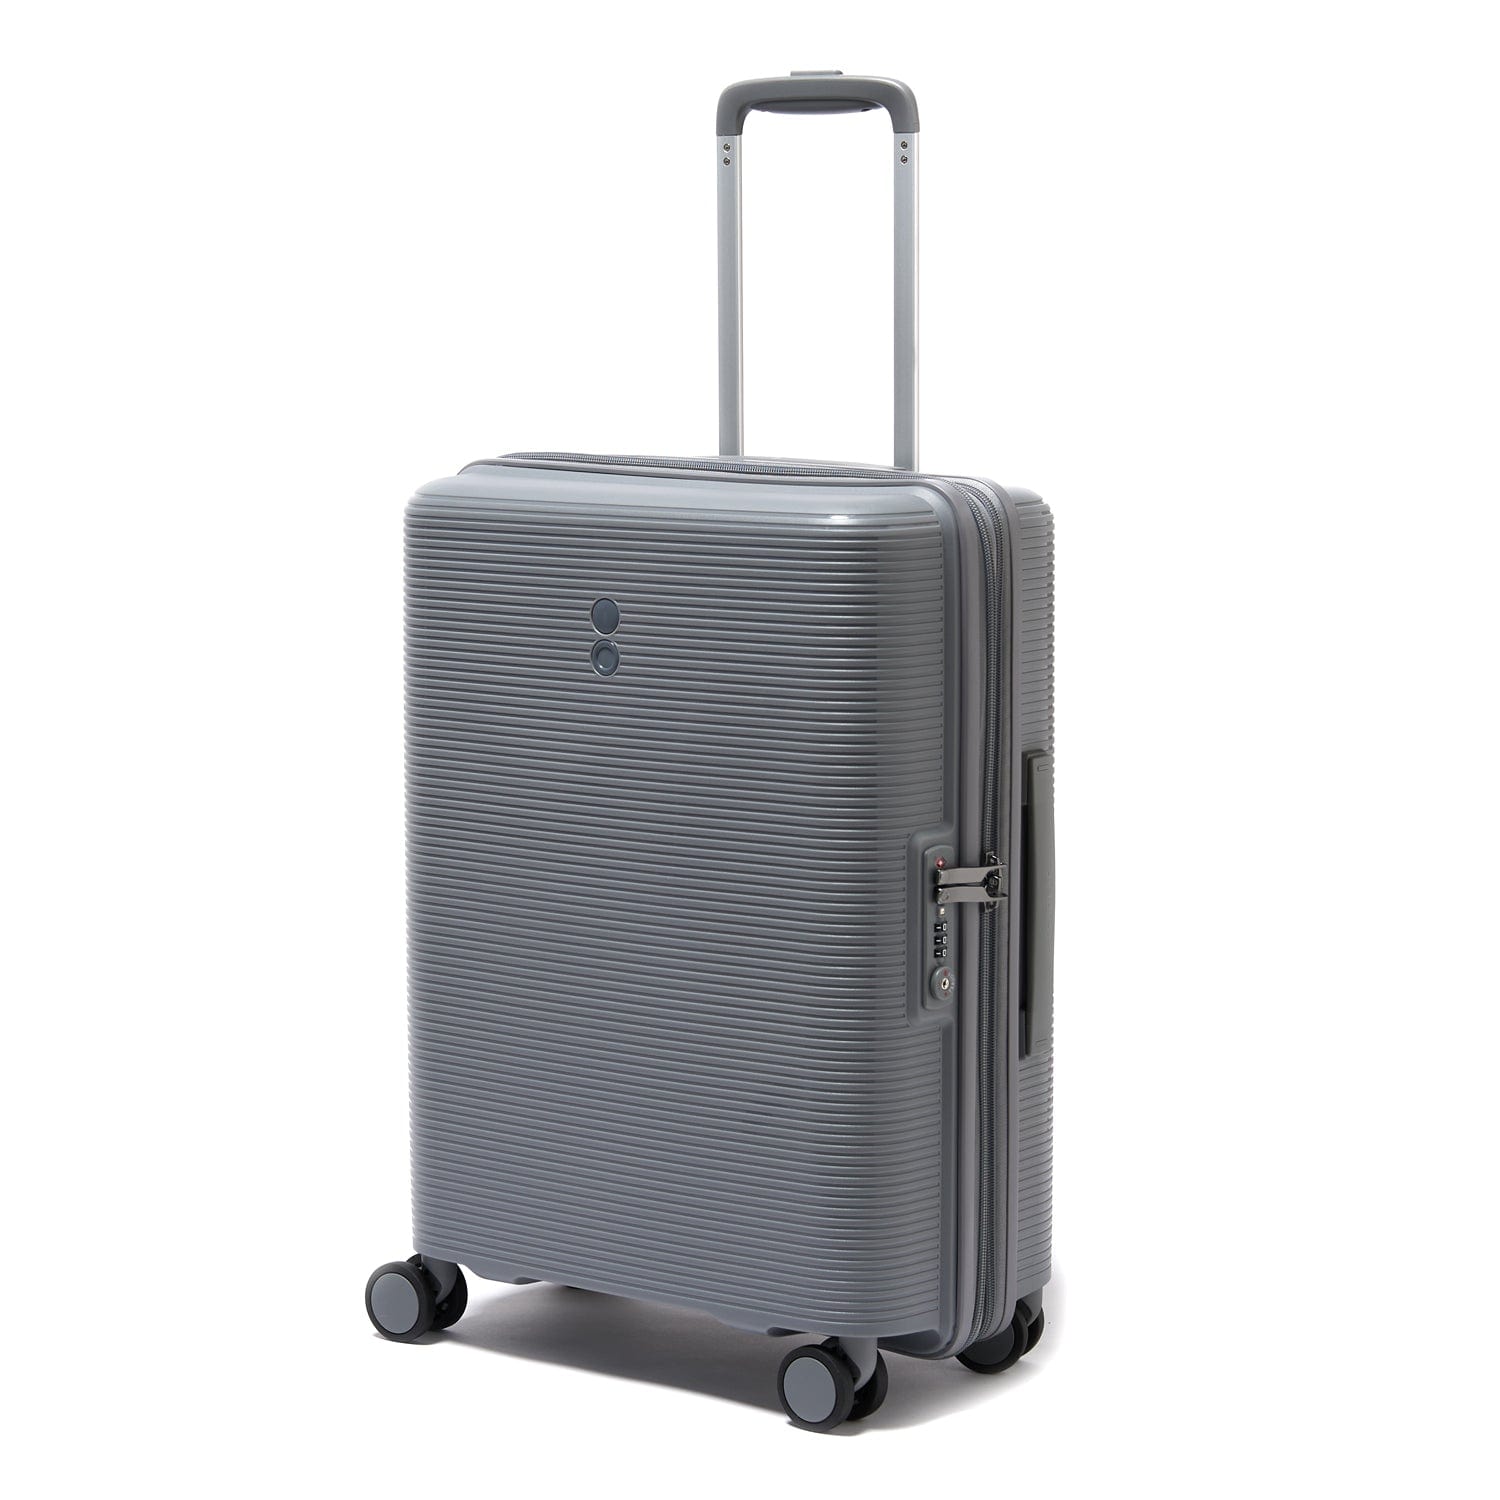 Echolac Forza 55cm Hardcase Expandable 4 Double Wheel Cabin Luggage Trolley Gray - PW005 20 Arctic Grey